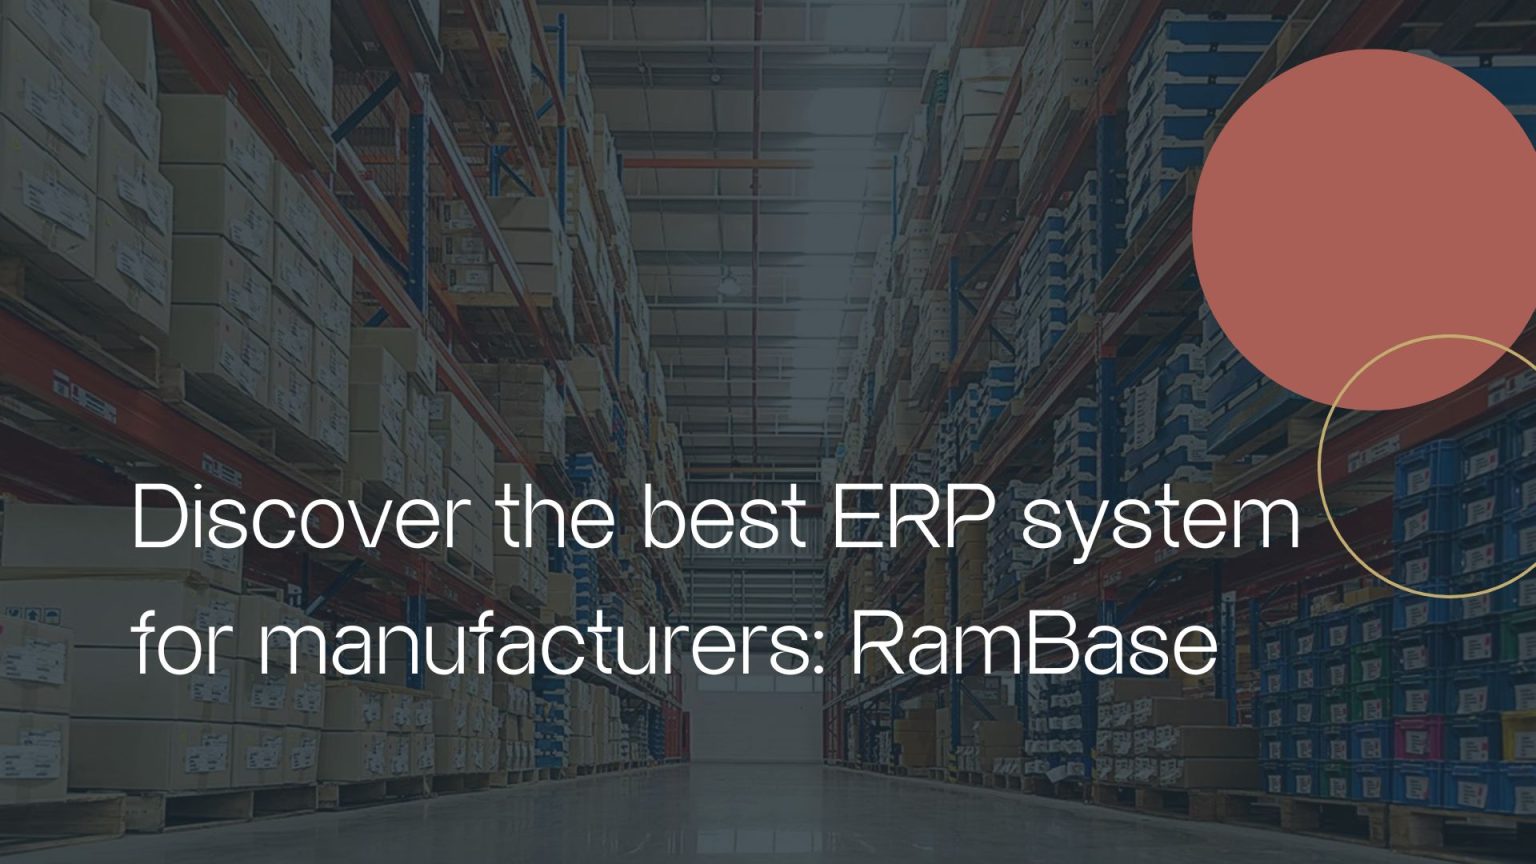 Discover the best ERP system for manufacturers RamBase